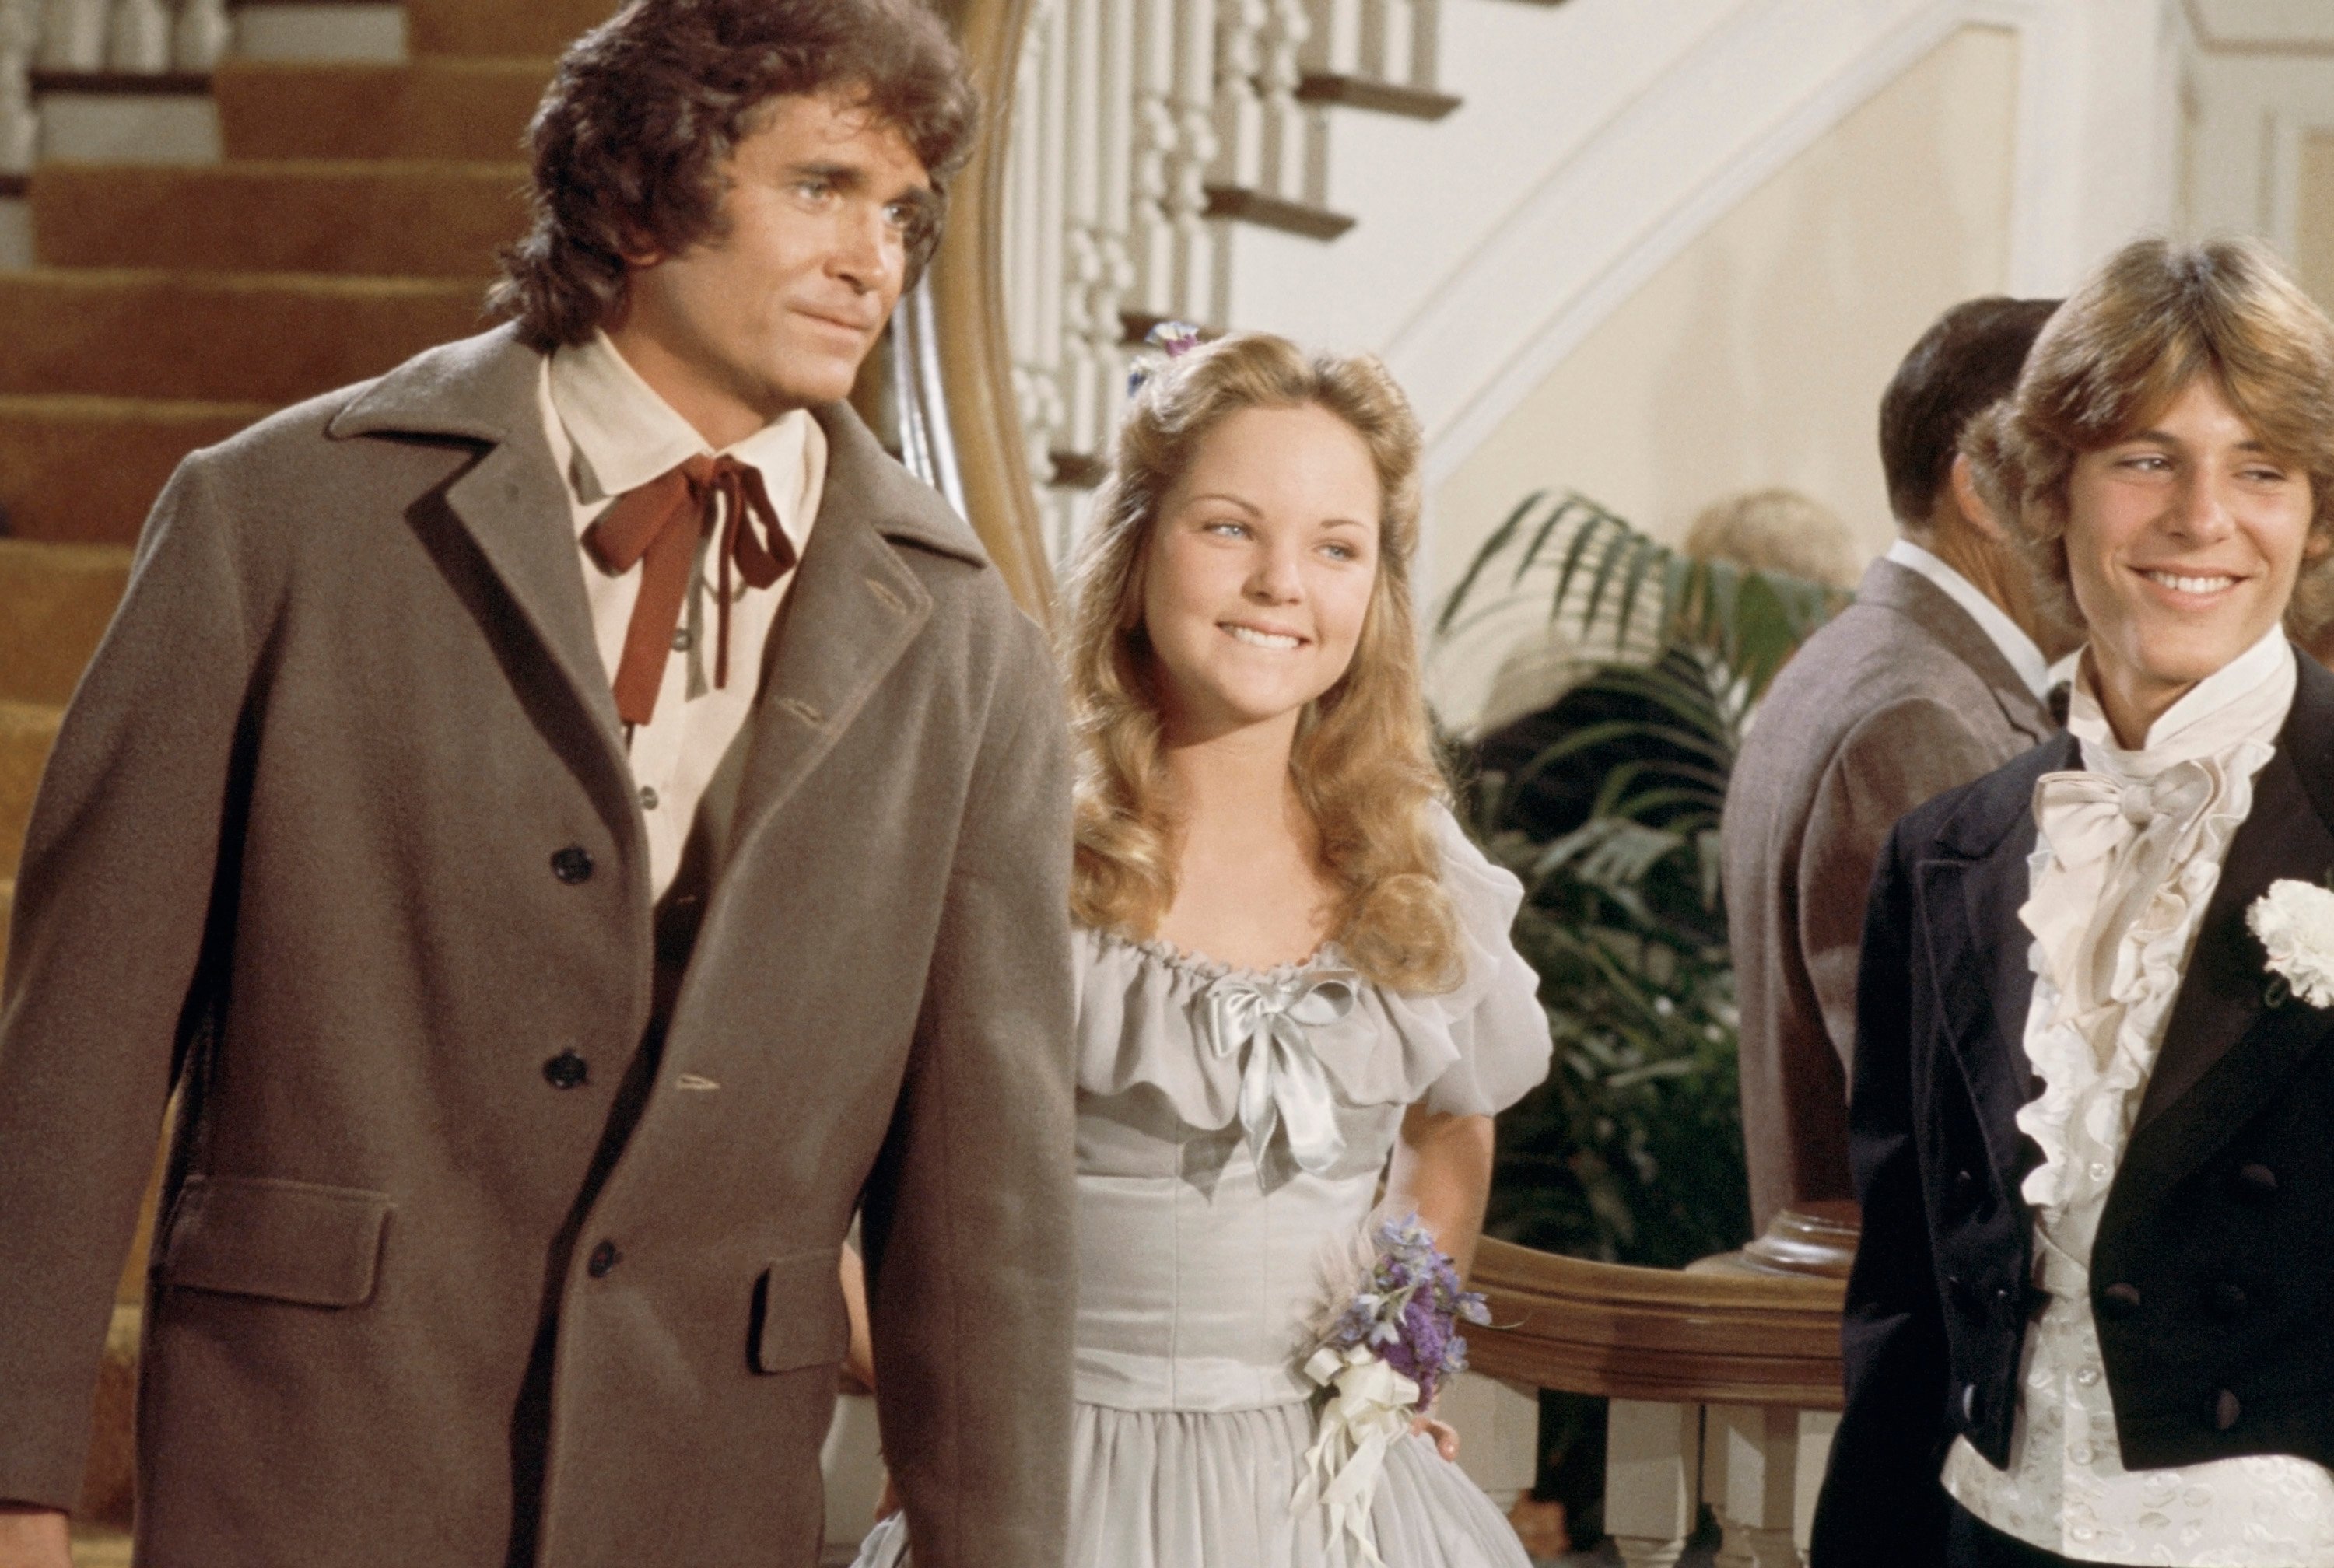 LITTLE HOUSE ON THE PRAIRIE -- "The Wedding" Episode 9 -- Aired 11/6/78 -- Pictured: (l-r) Michael Landon as Charles Philip Ingalls, Melissa Sue Anderson as Mary Ingalls, unknown